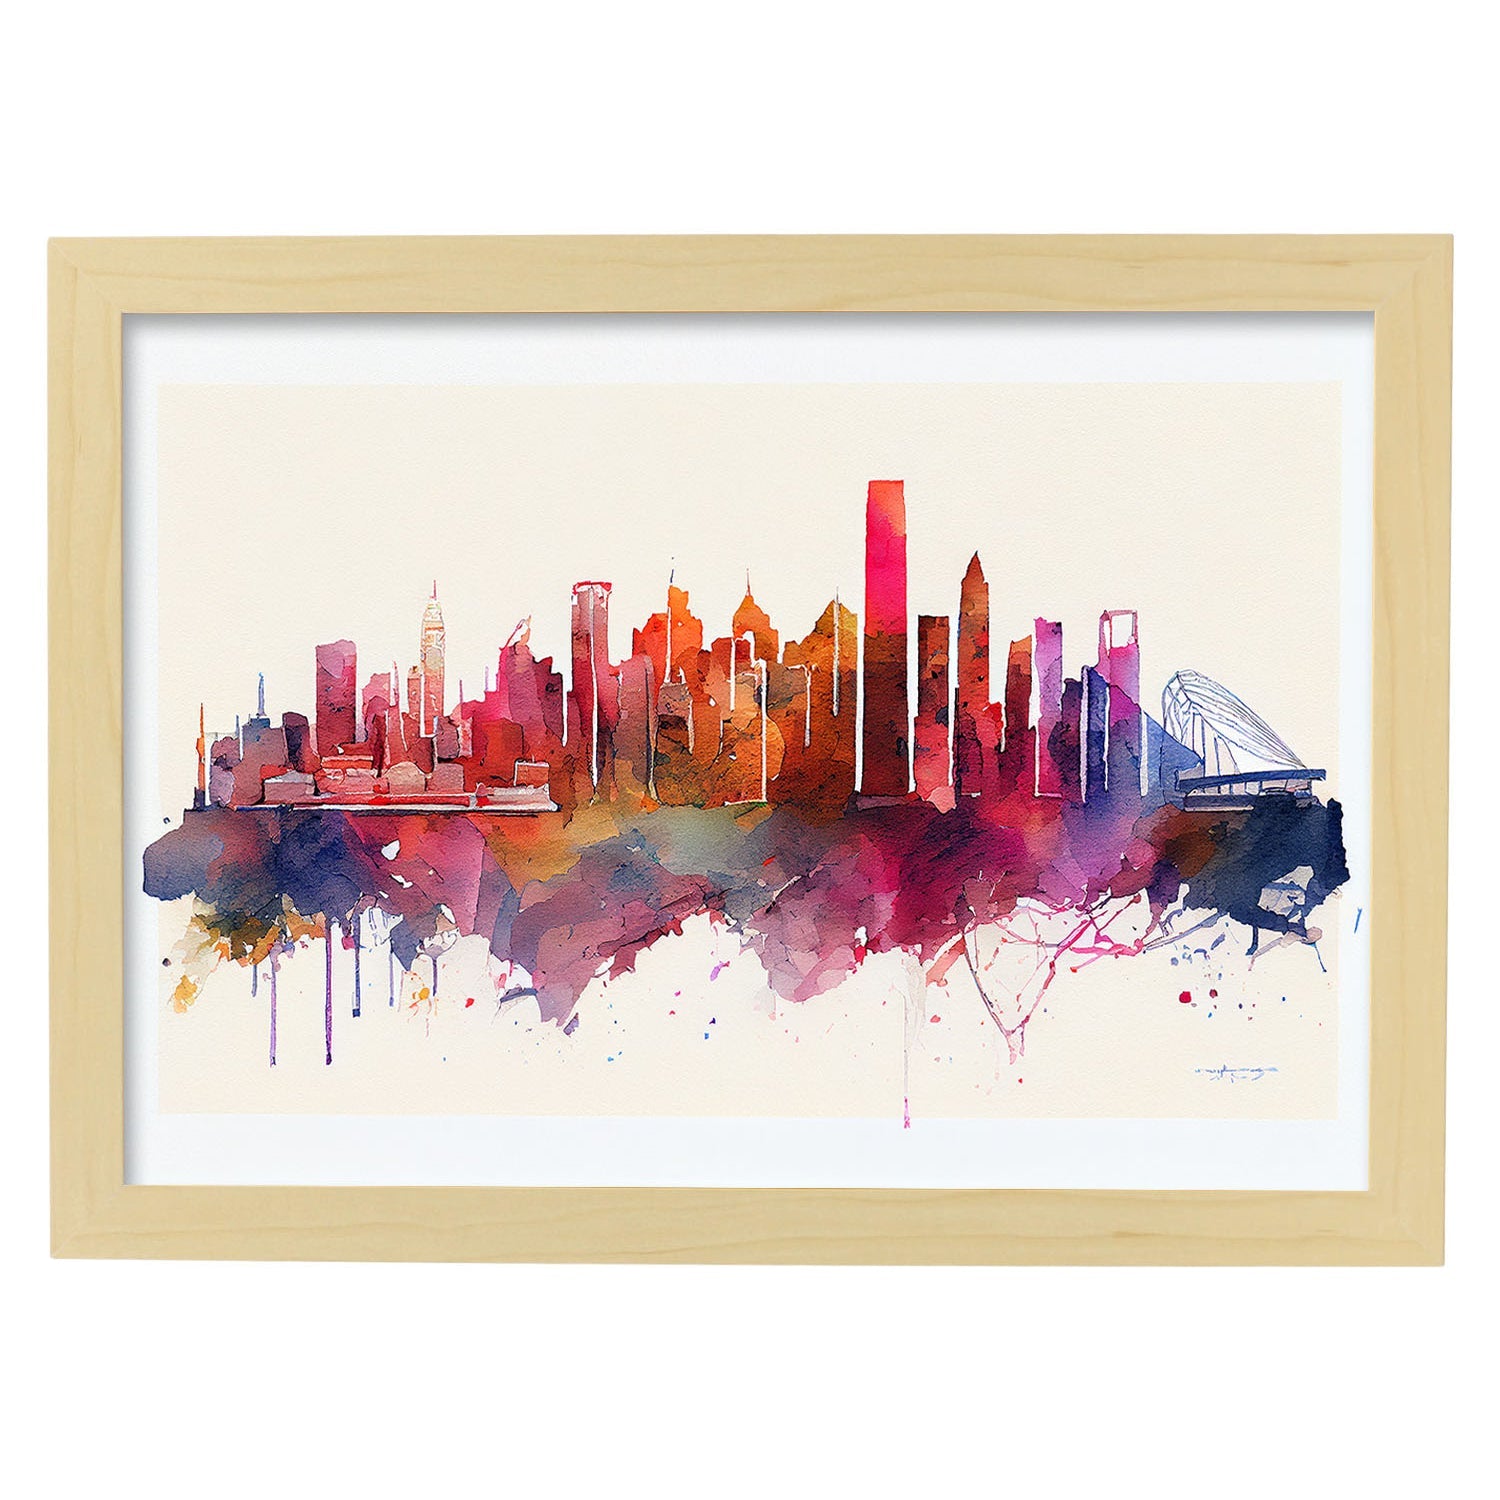 Nacnic watercolor of a skyline of the city of Hong Kong_4. Aesthetic Wall Art Prints for Bedroom or Living Room Design.-Artwork-Nacnic-A4-Marco Madera Clara-Nacnic Estudio SL